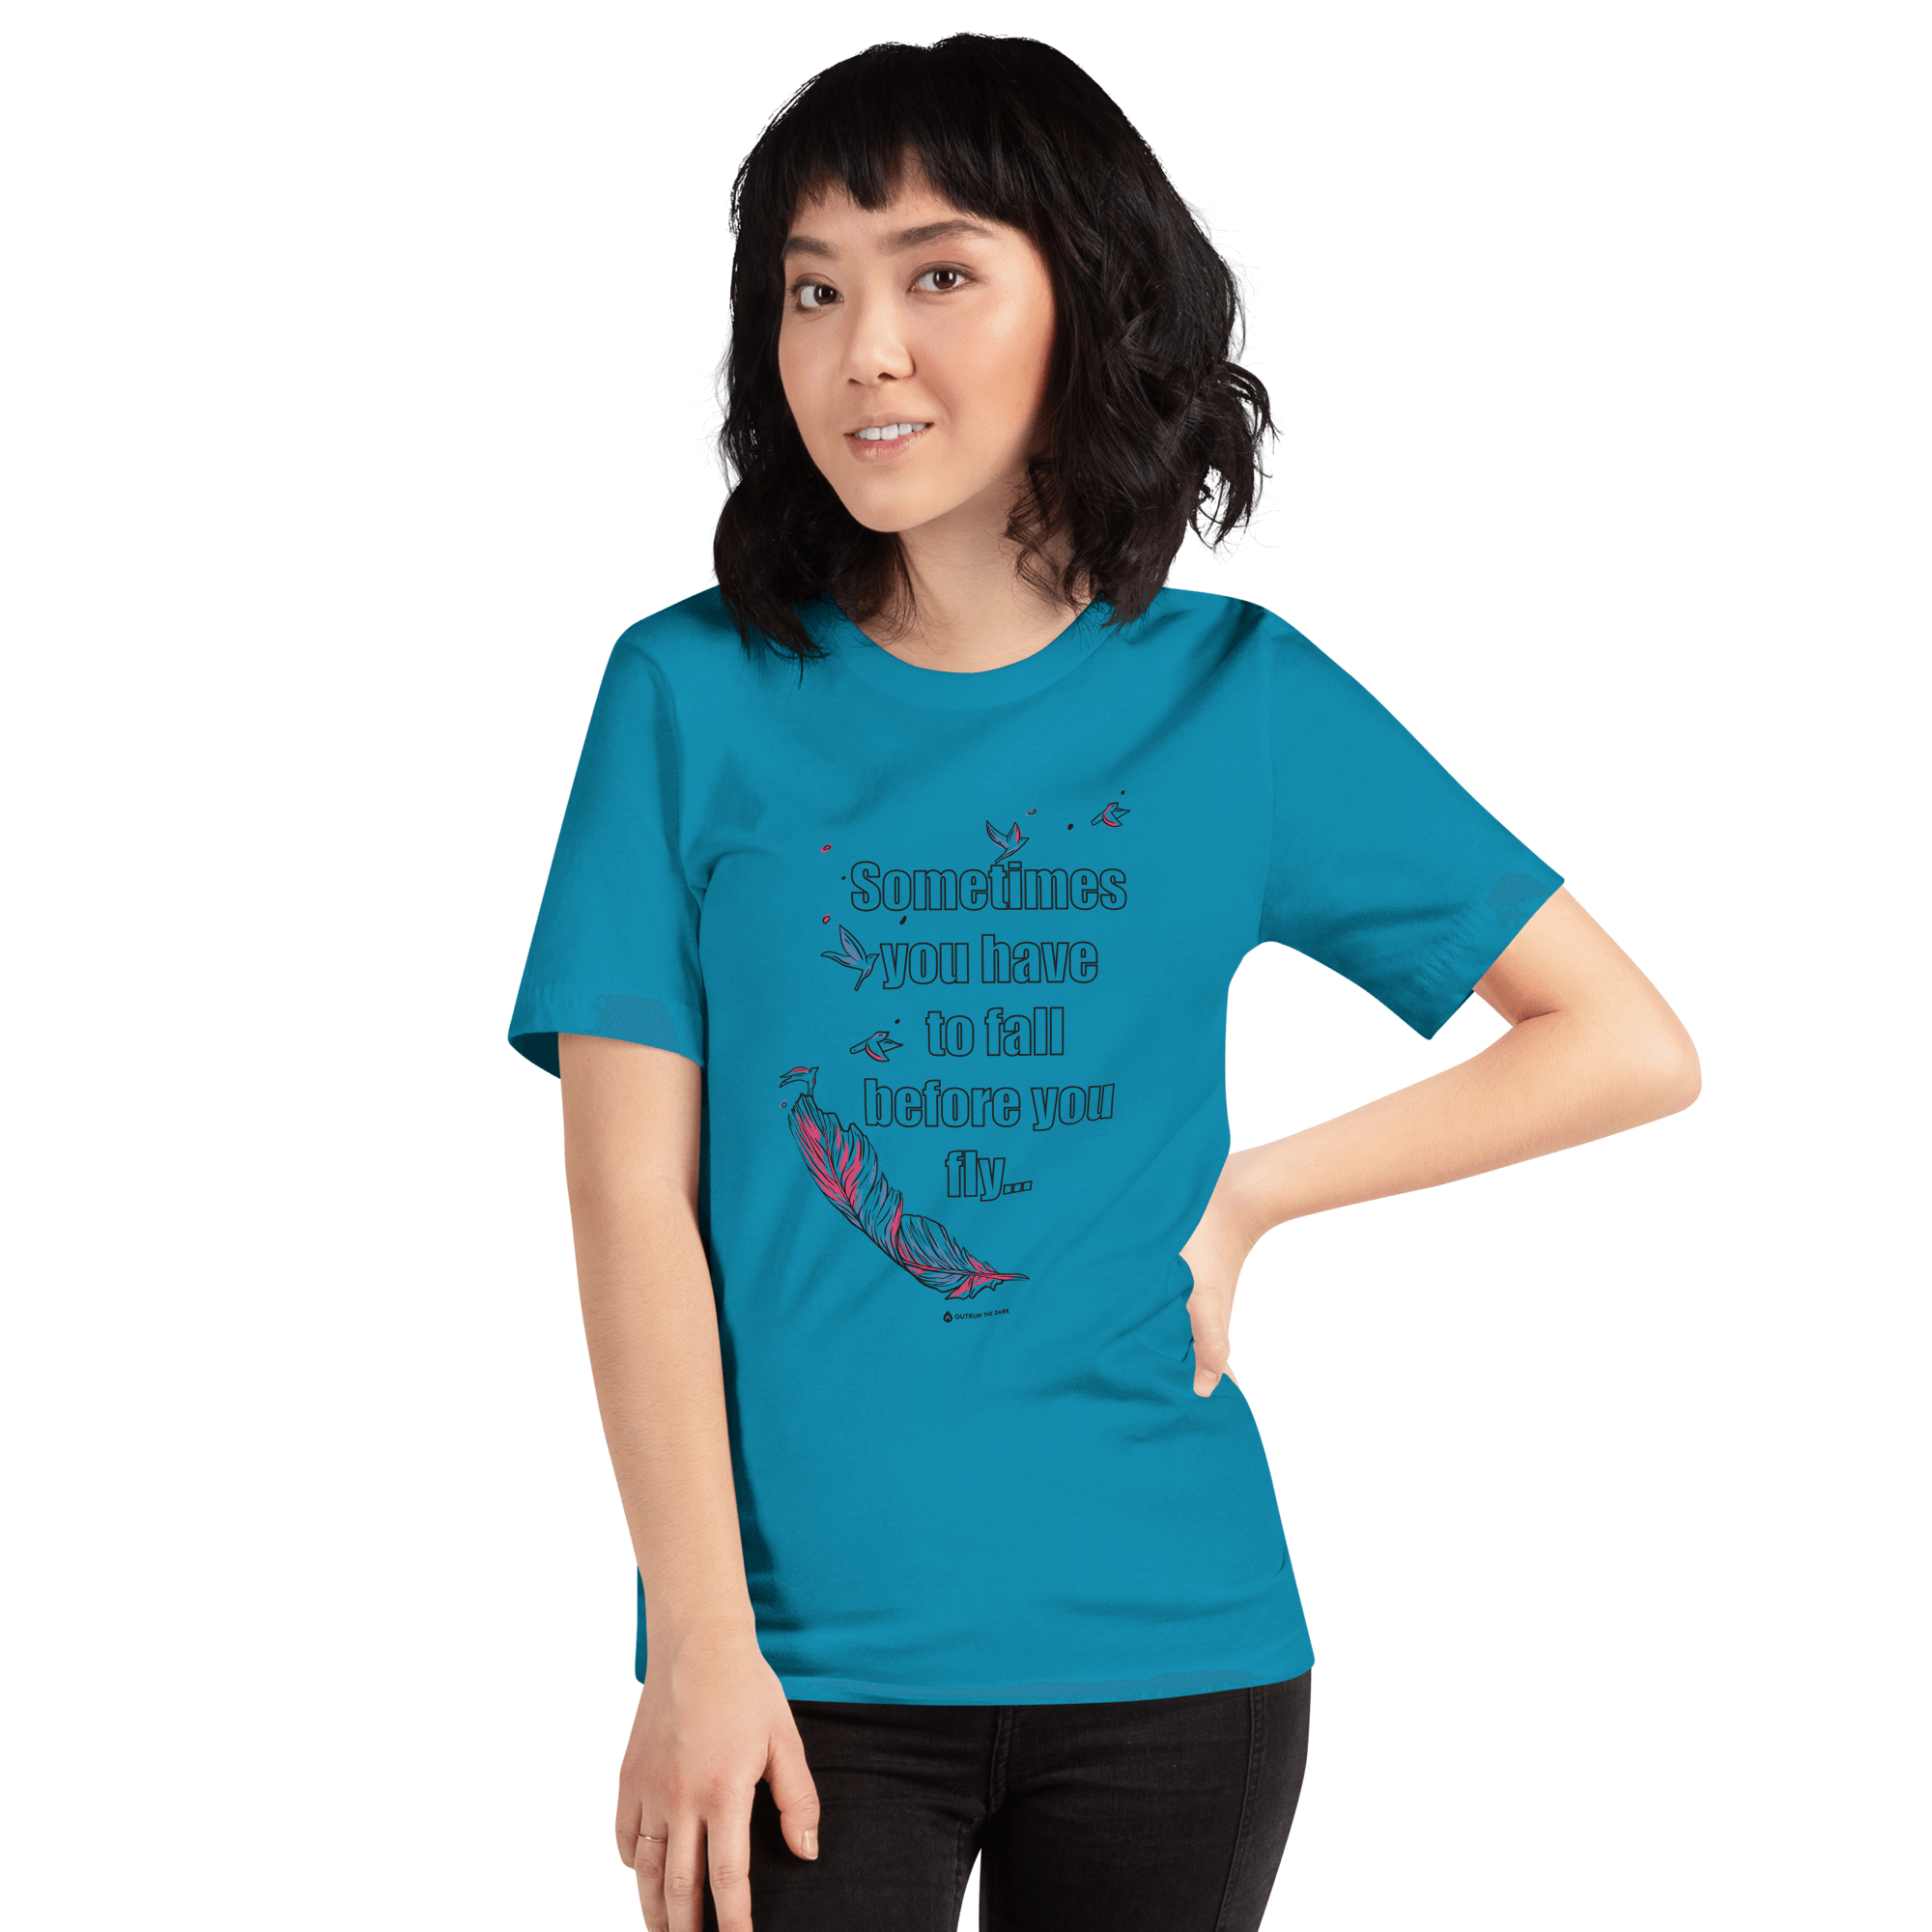 Before you fly Women’s Tee